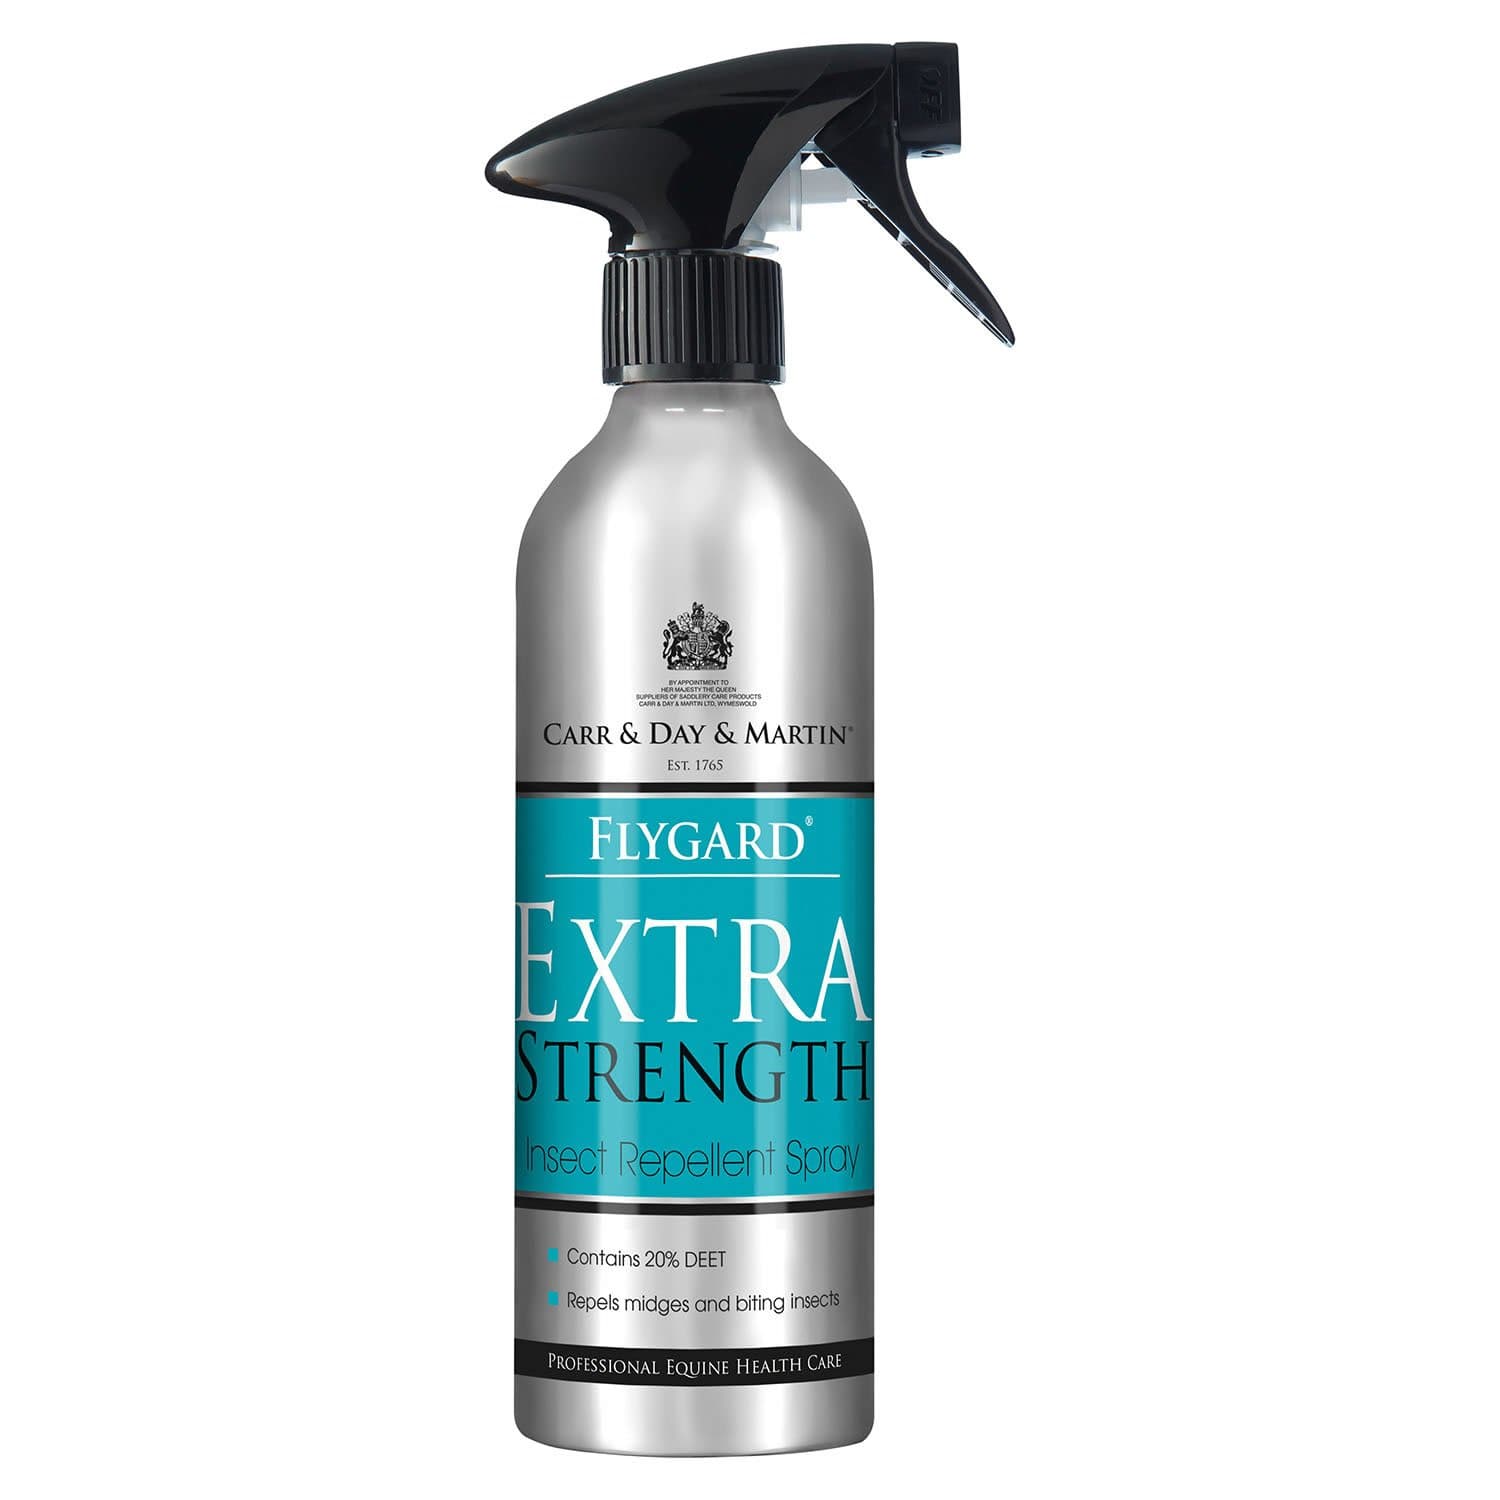 Carr & Day & Martin Flyguard Extra Strength Insect Repellent